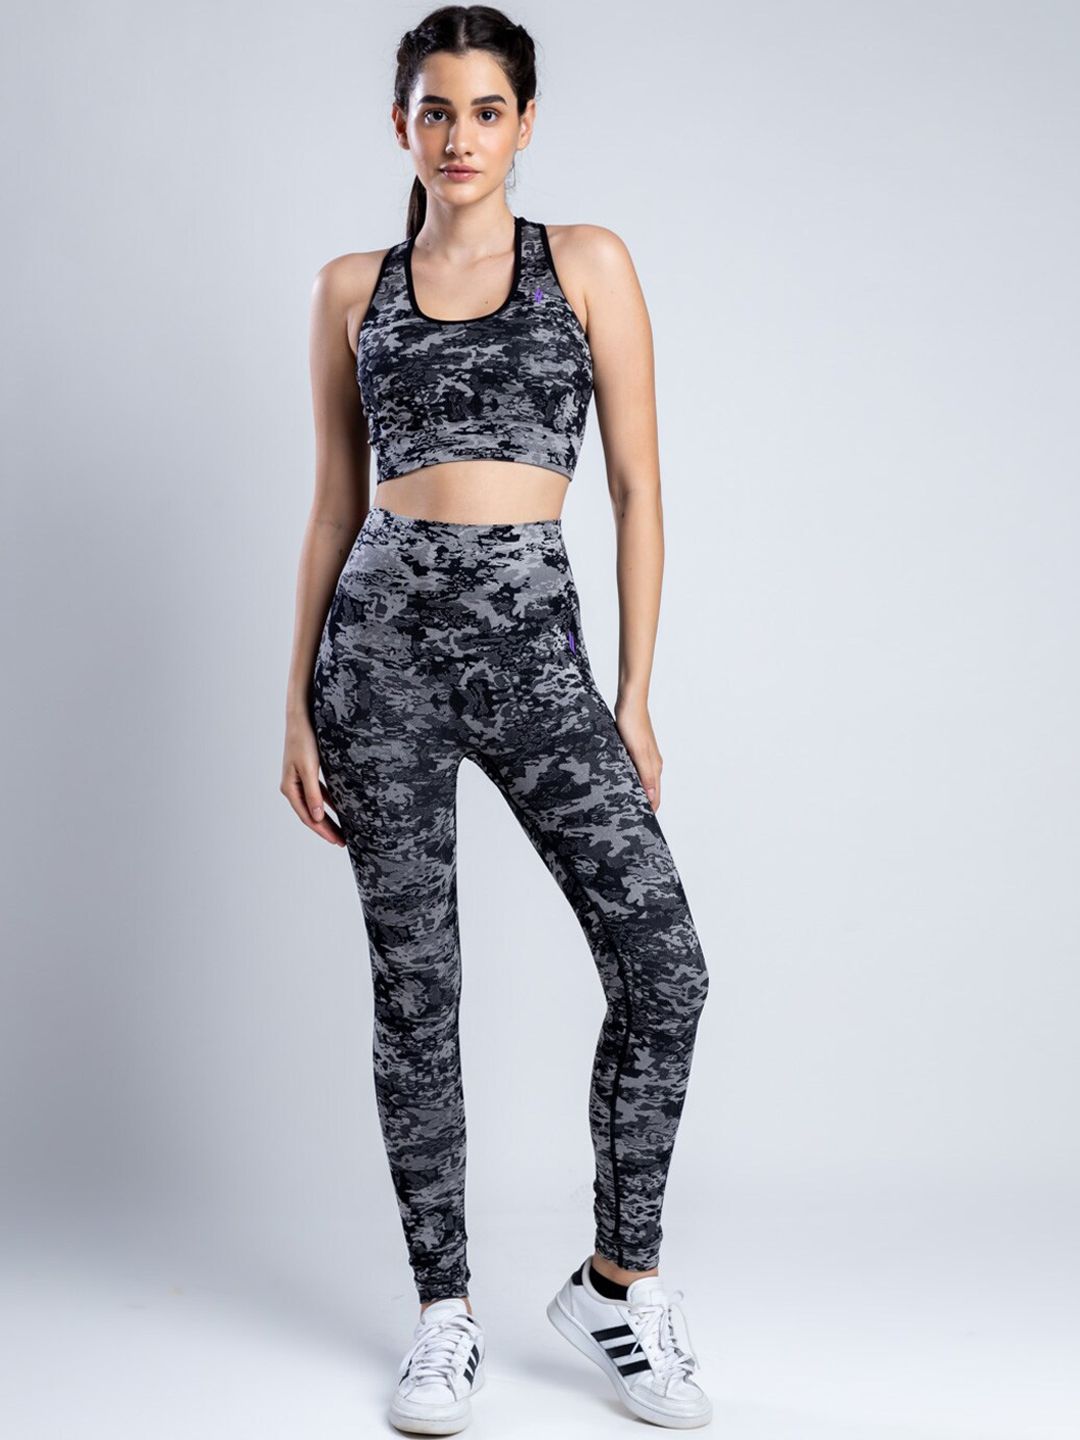 SKNZ Women Black Camouflage Printed Tracksuits Price in India